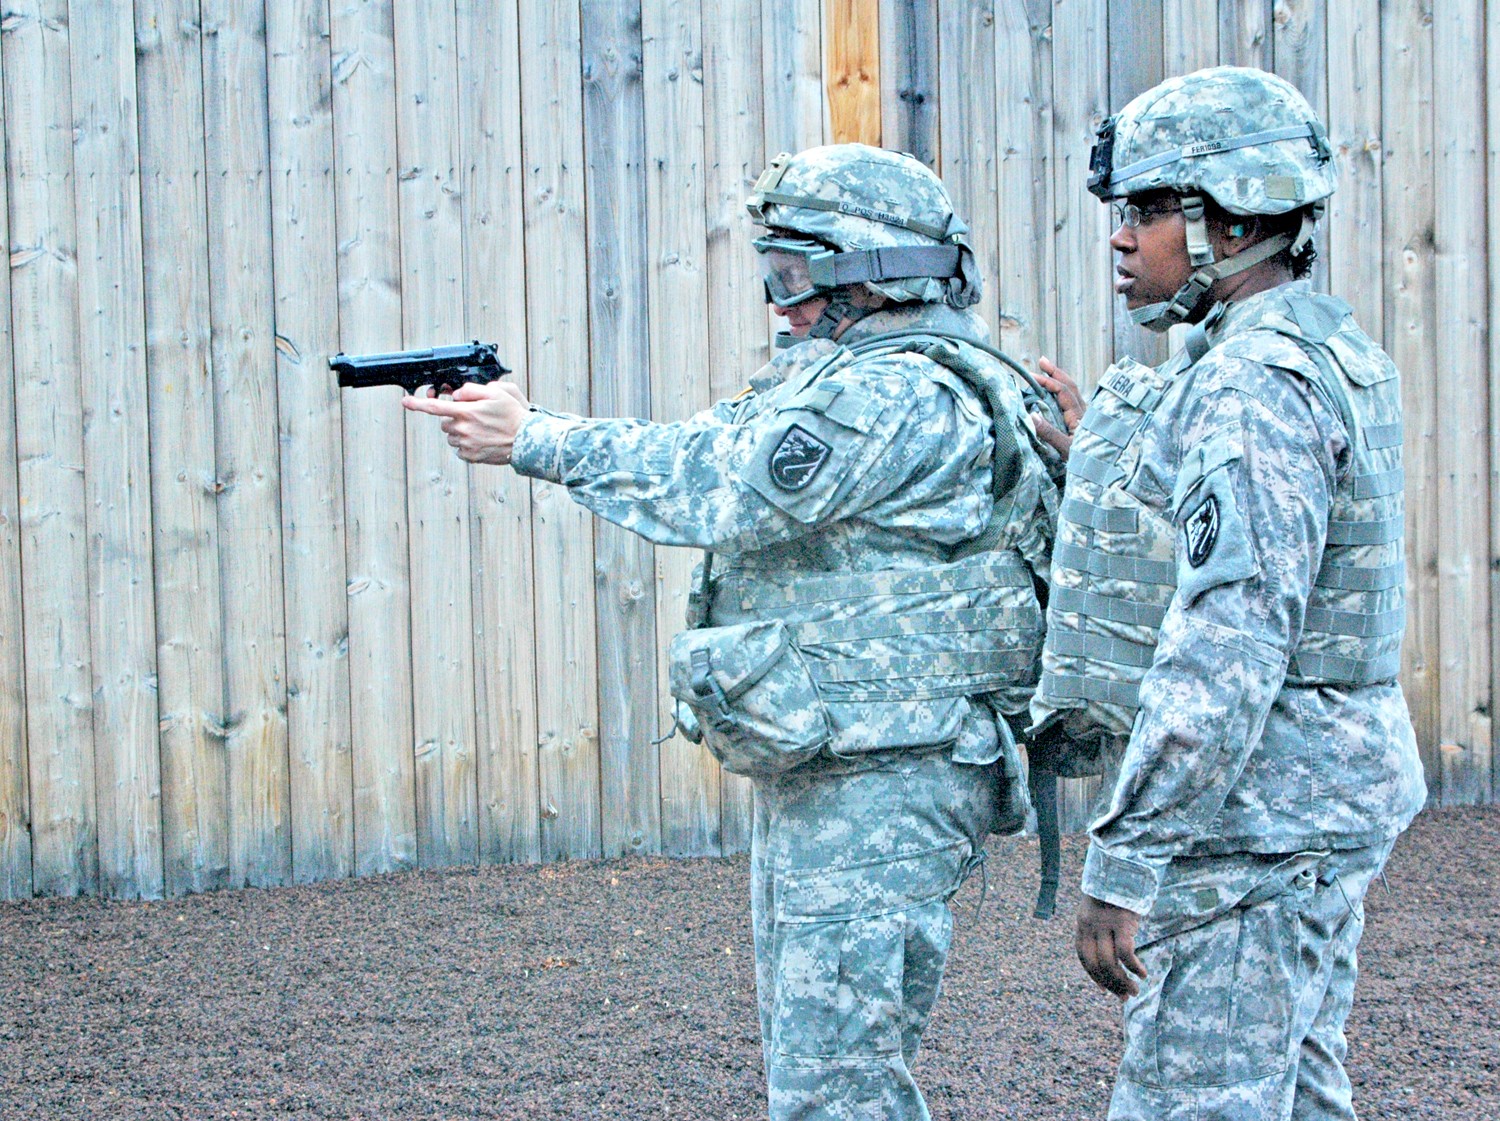 Female Soldiers encouraged by growing opportunities for women > Joint Base  San Antonio > News